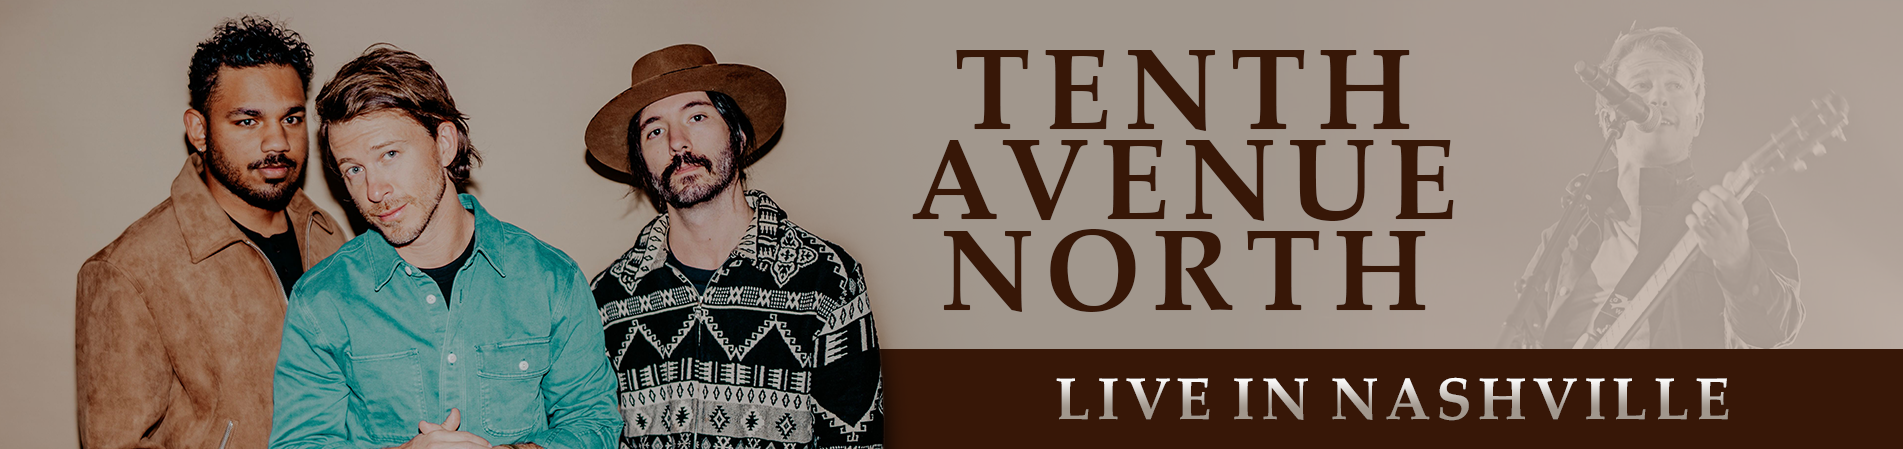 4.4.24 - Website Banner - Tenth Avenue North.png